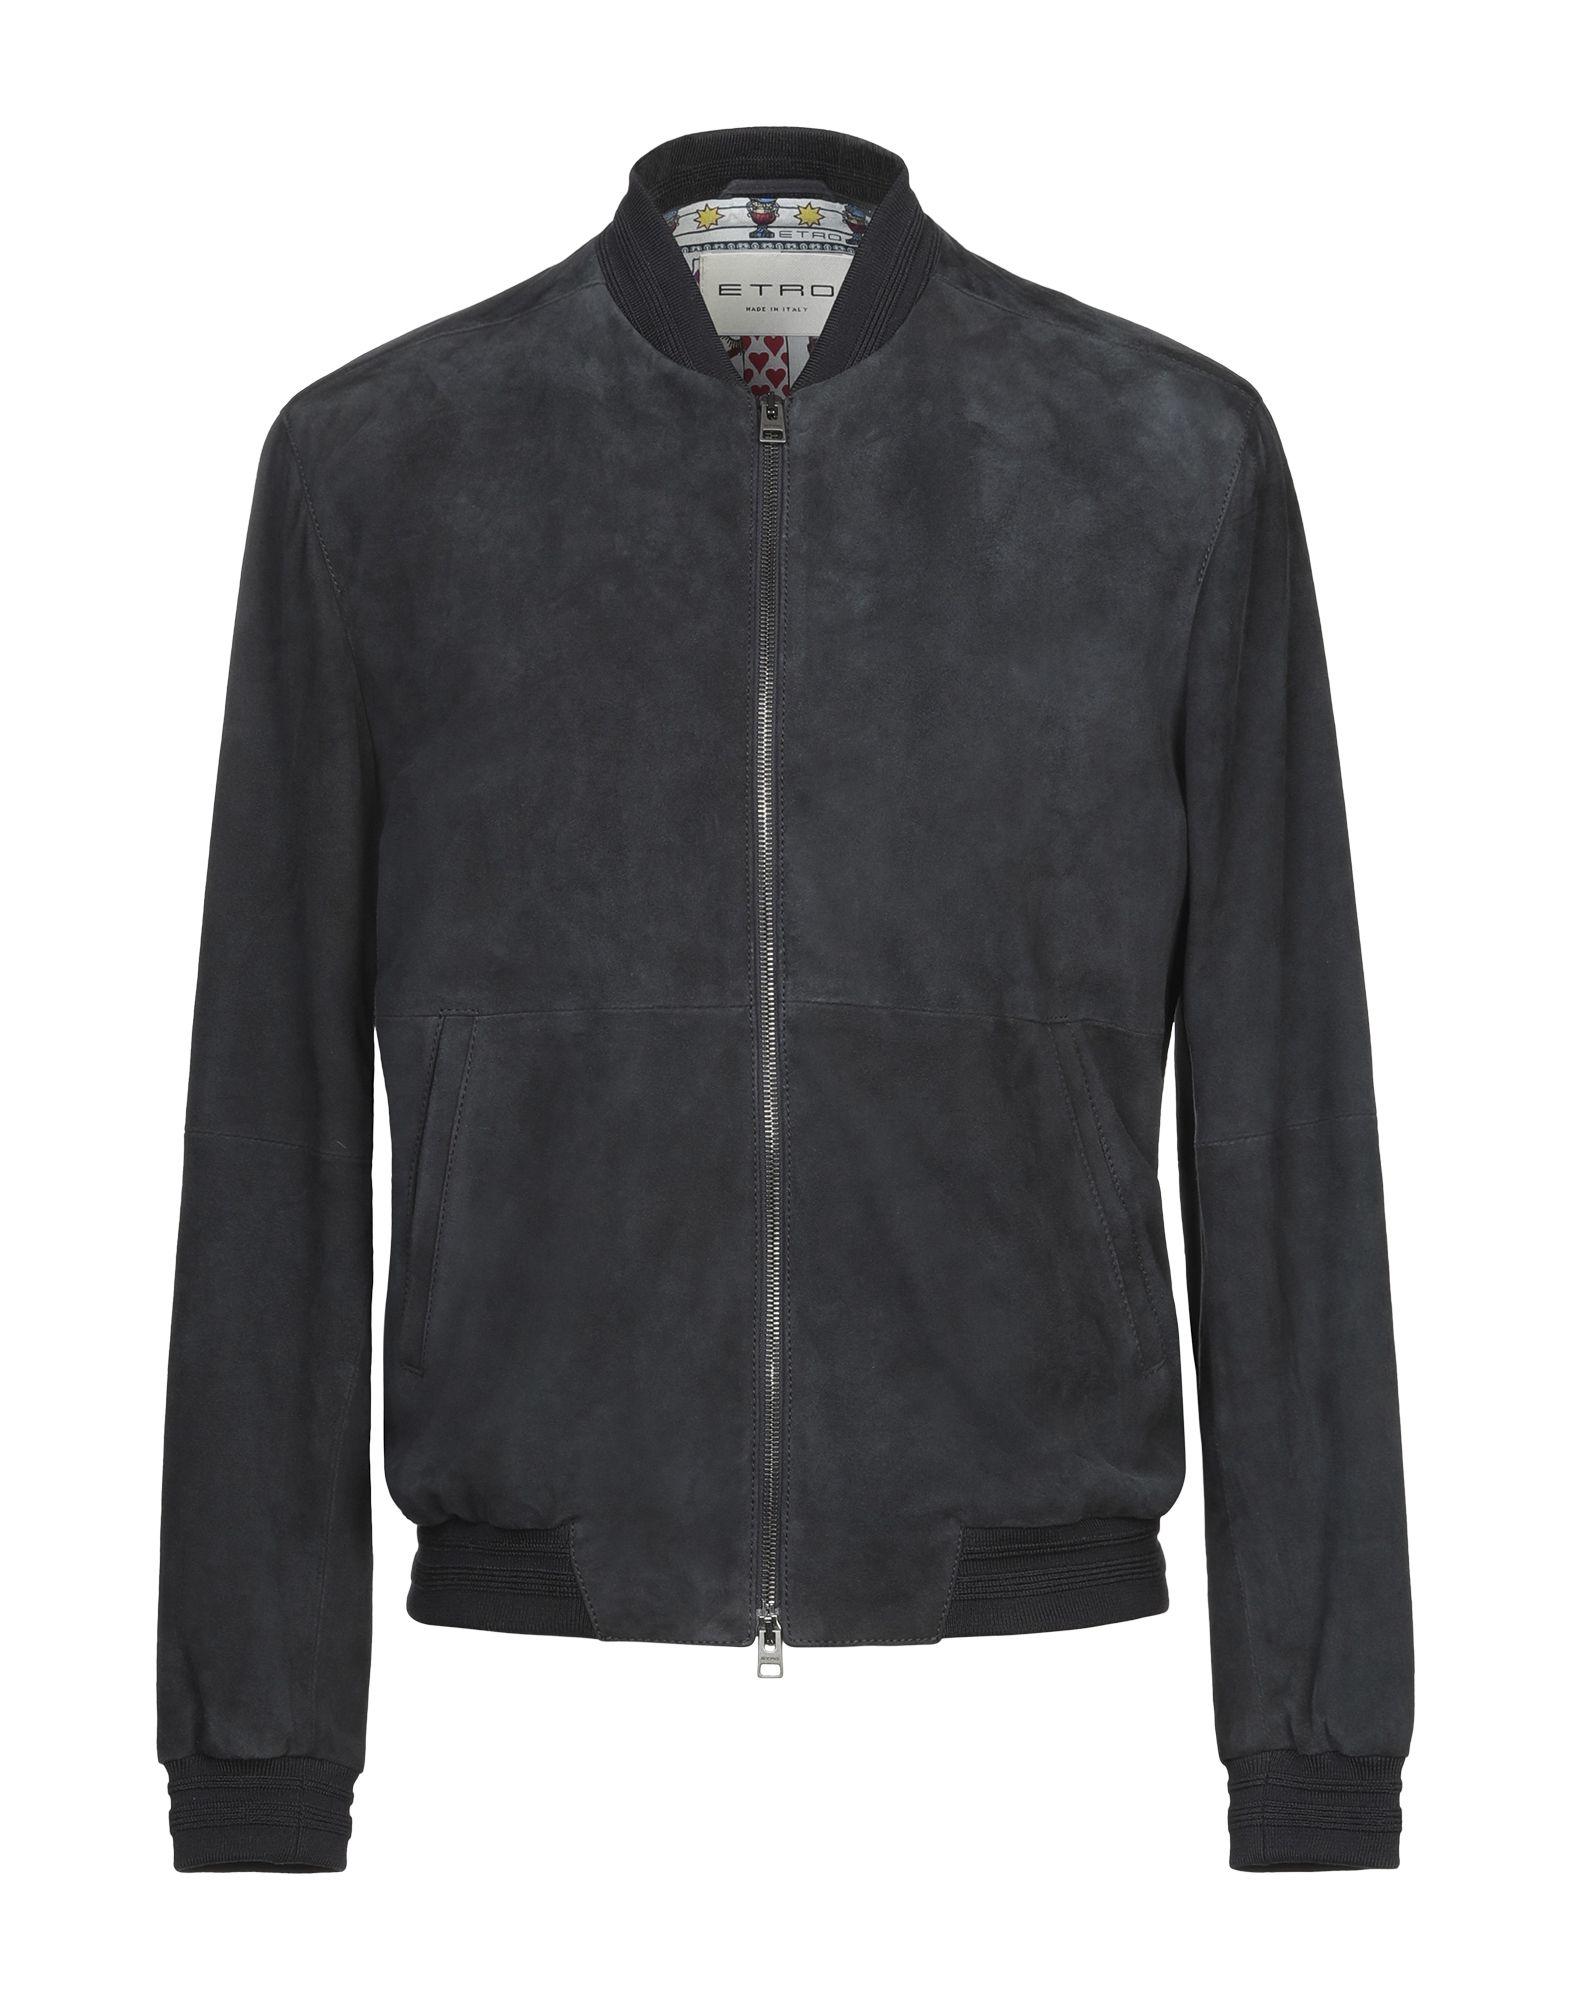 Etro Synthetic Jacket in Black for Men - Lyst